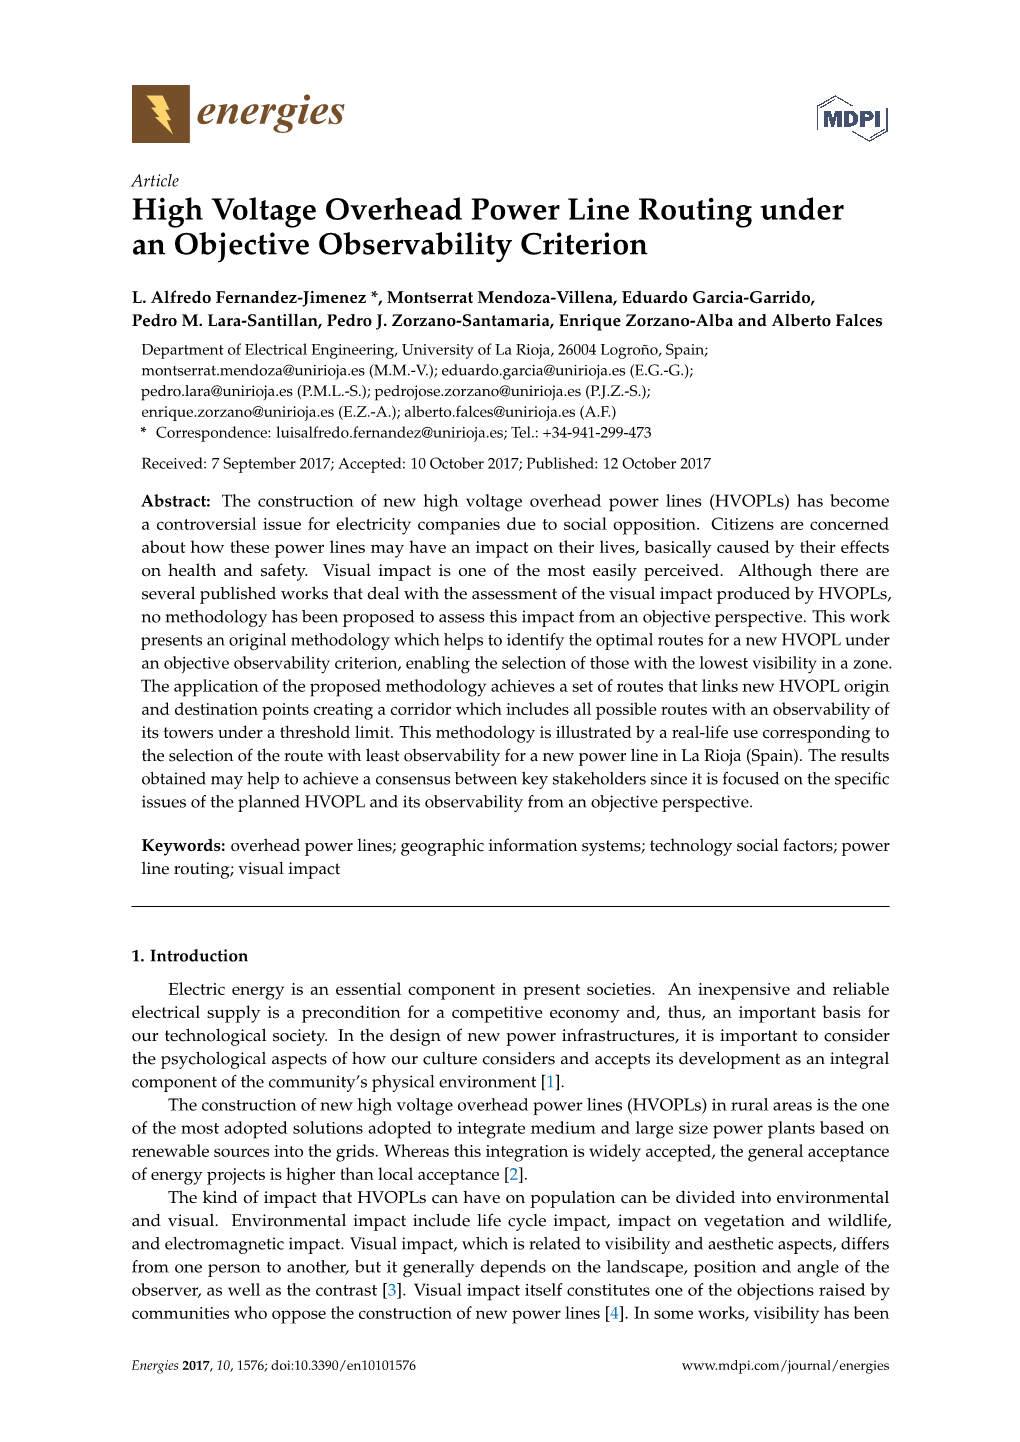 High Voltage Overhead Power Line Routing Under an Objective Observability Criterion